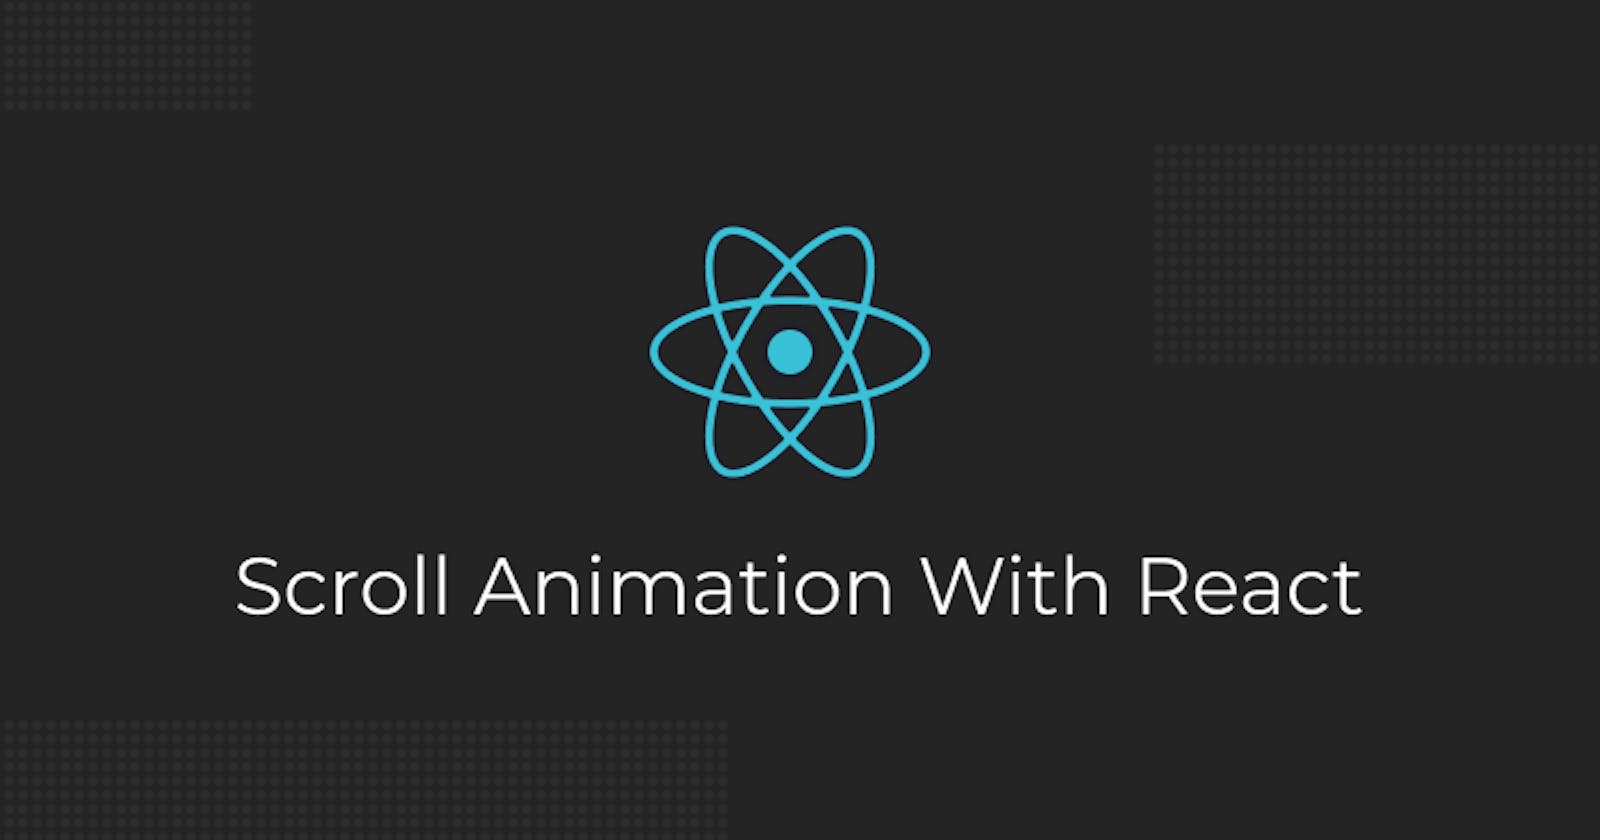 Scroll animation for text in React